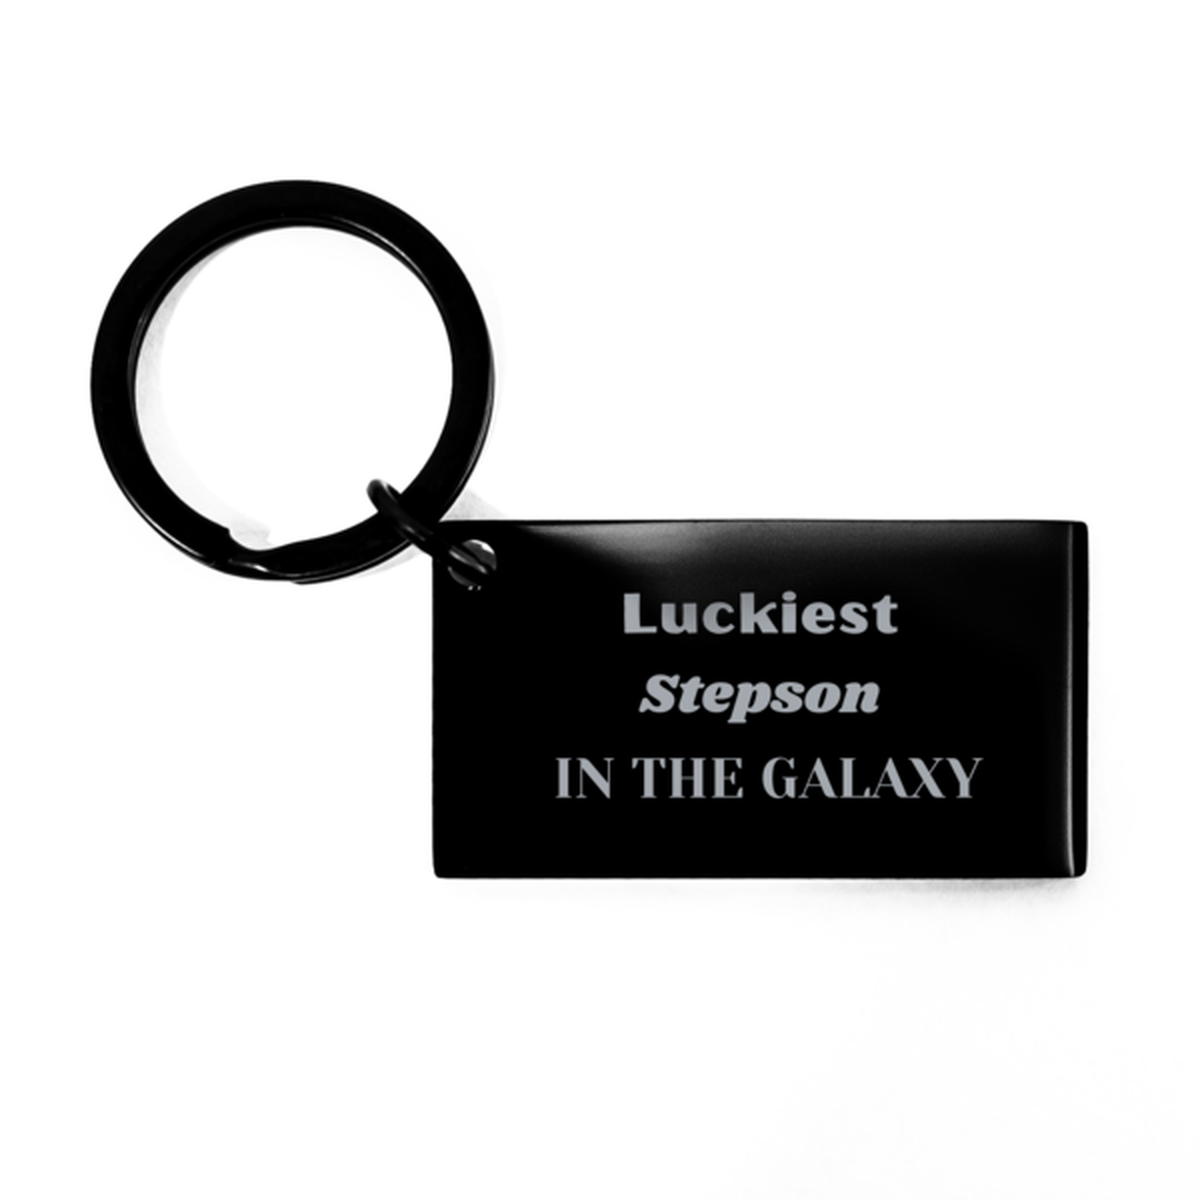 Luckiest Stepson in the Galaxy, To My Stepson Engraved Gifts, Christmas Stepson Keychain Gifts, X-mas Birthday Unique Gifts For Stepson Men Women